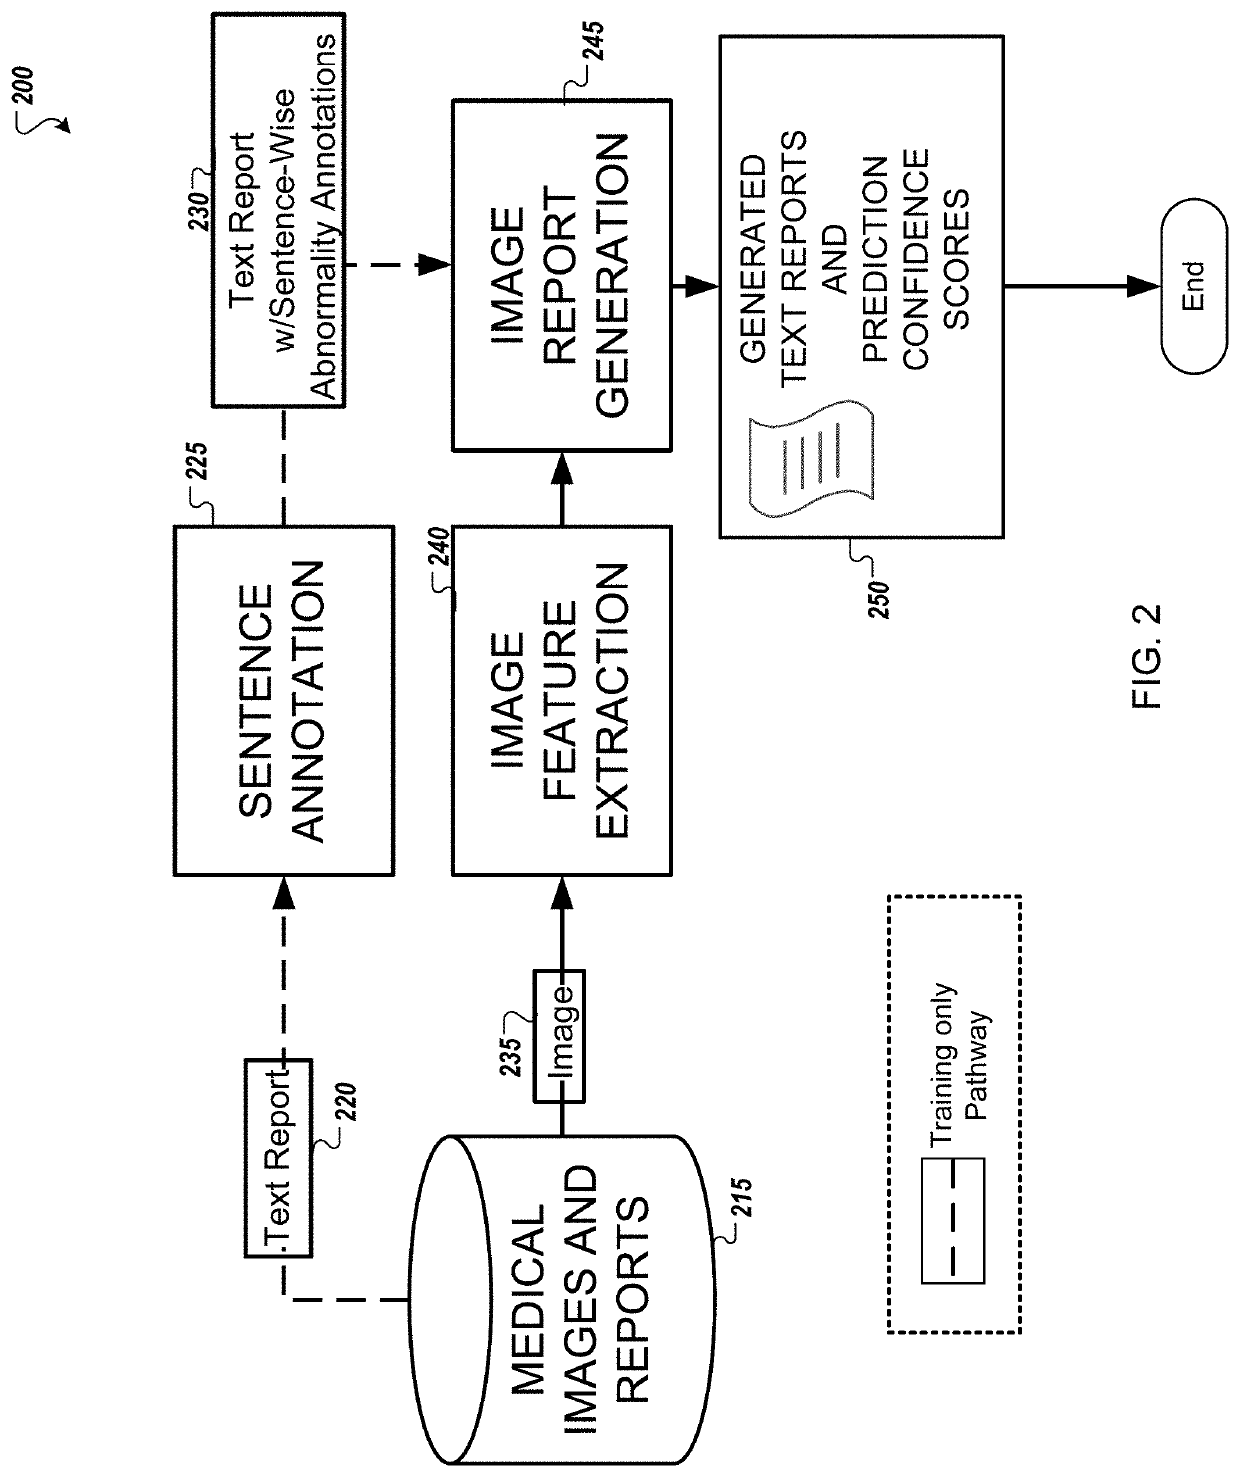 System and method for generating descriptions of abnormalities in medical images